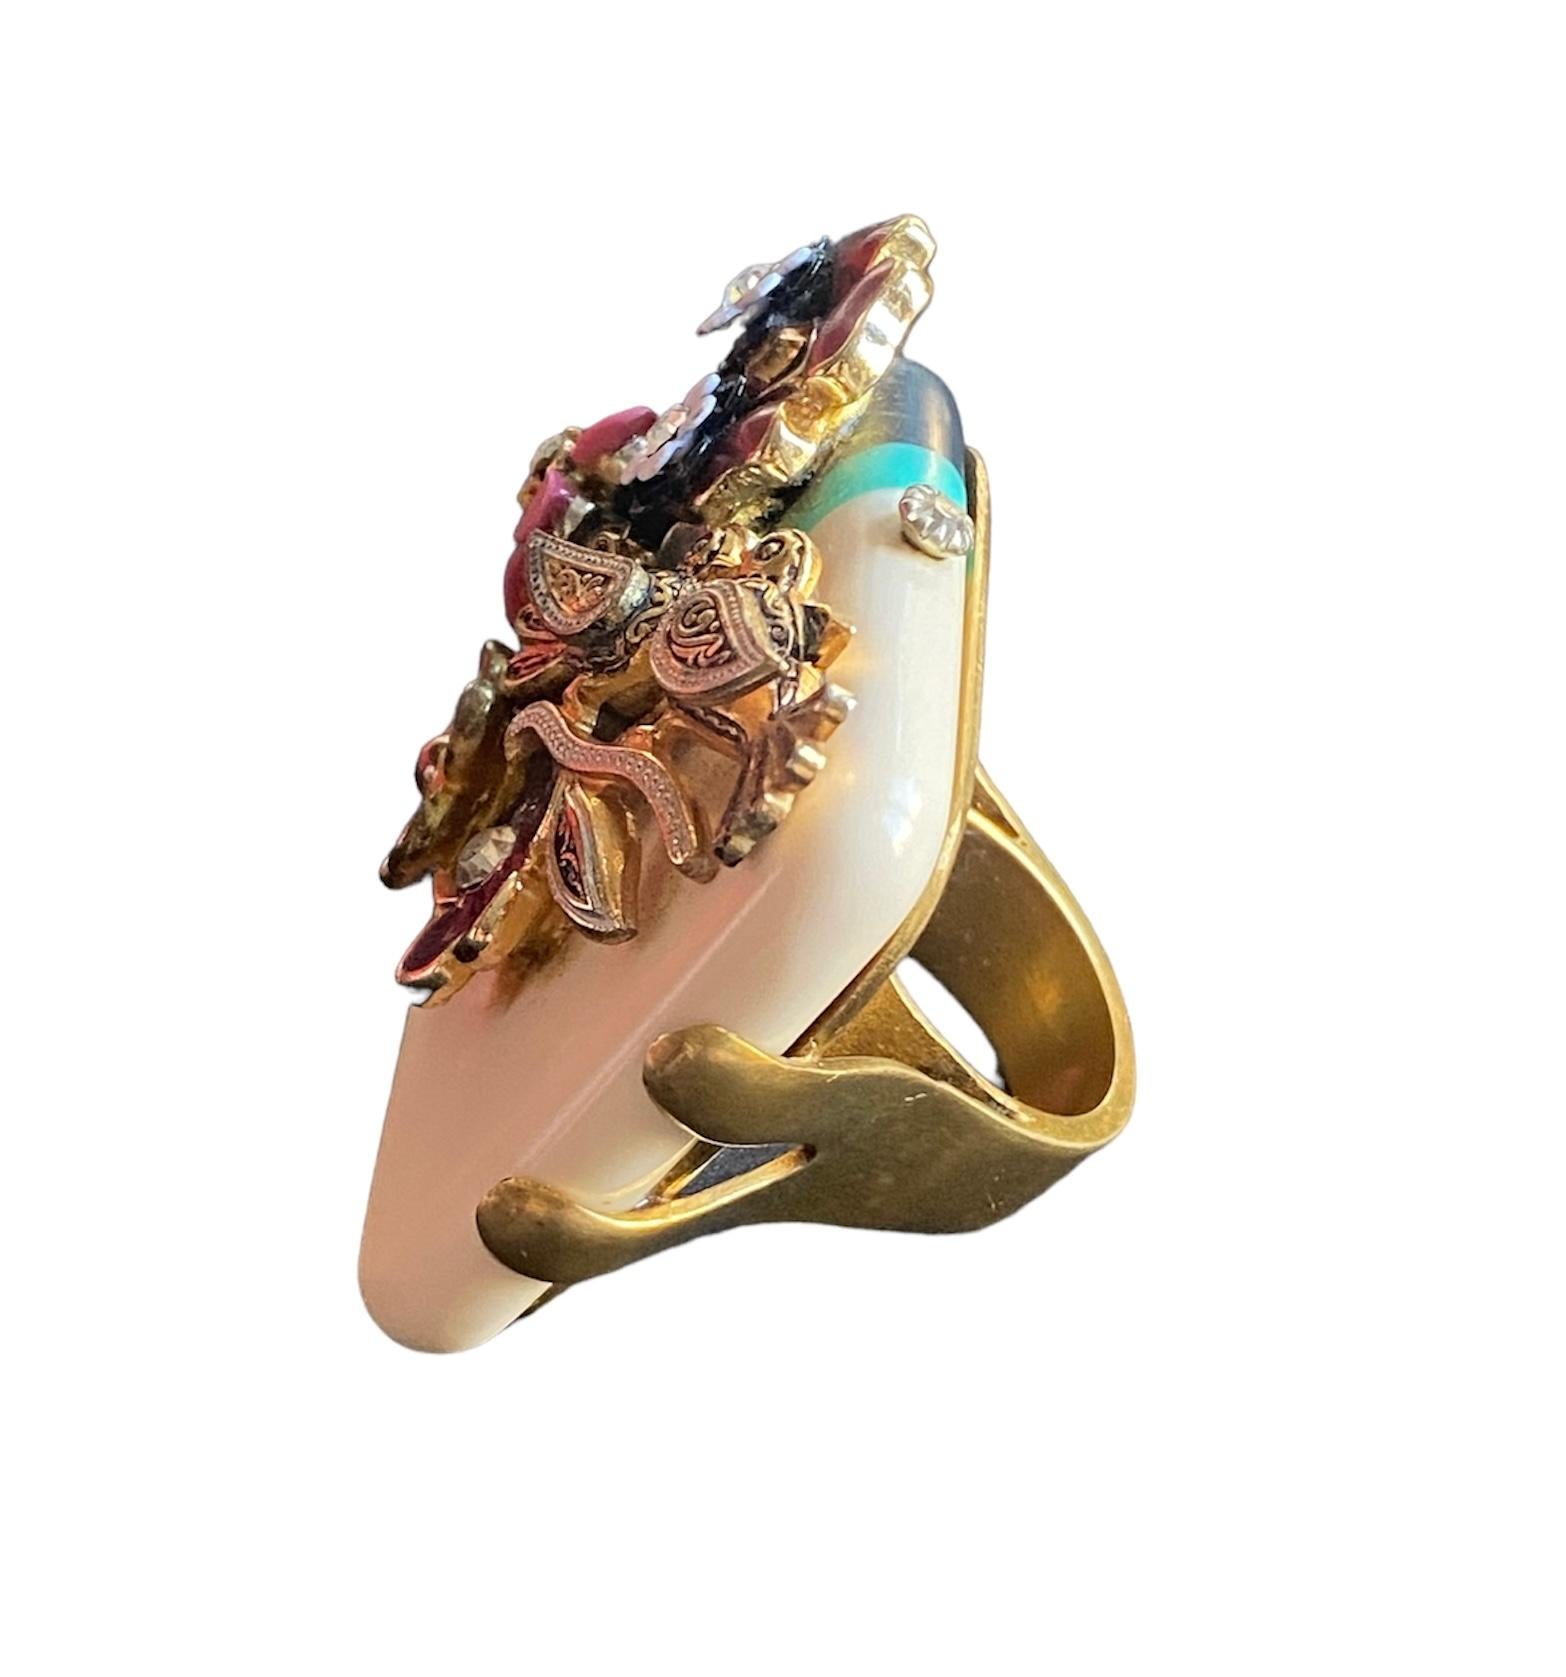 Artisan One Off Ring. High Upcycling. Resin, Gold Plated Bronze & Vintage Elements. For Sale